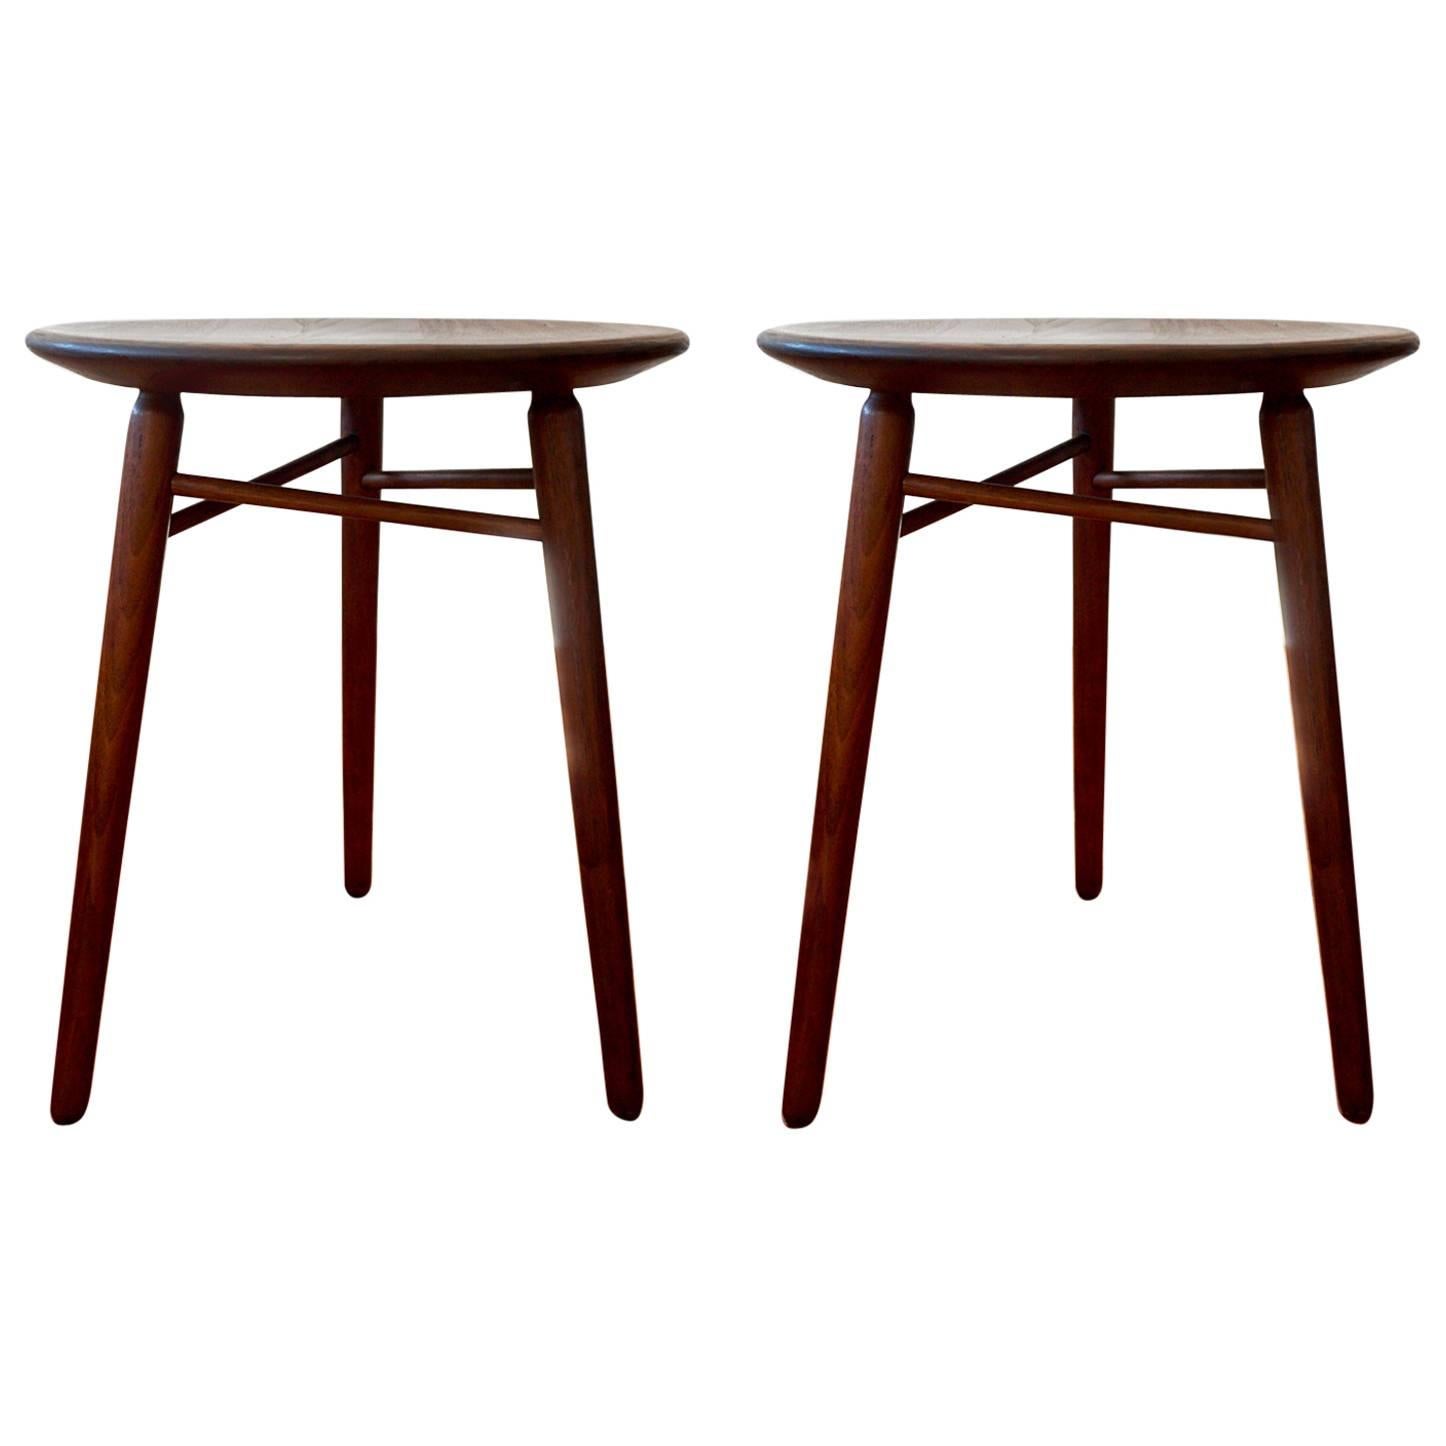 Pair of Walnut Occasional Tables or Stools by Glenn of California